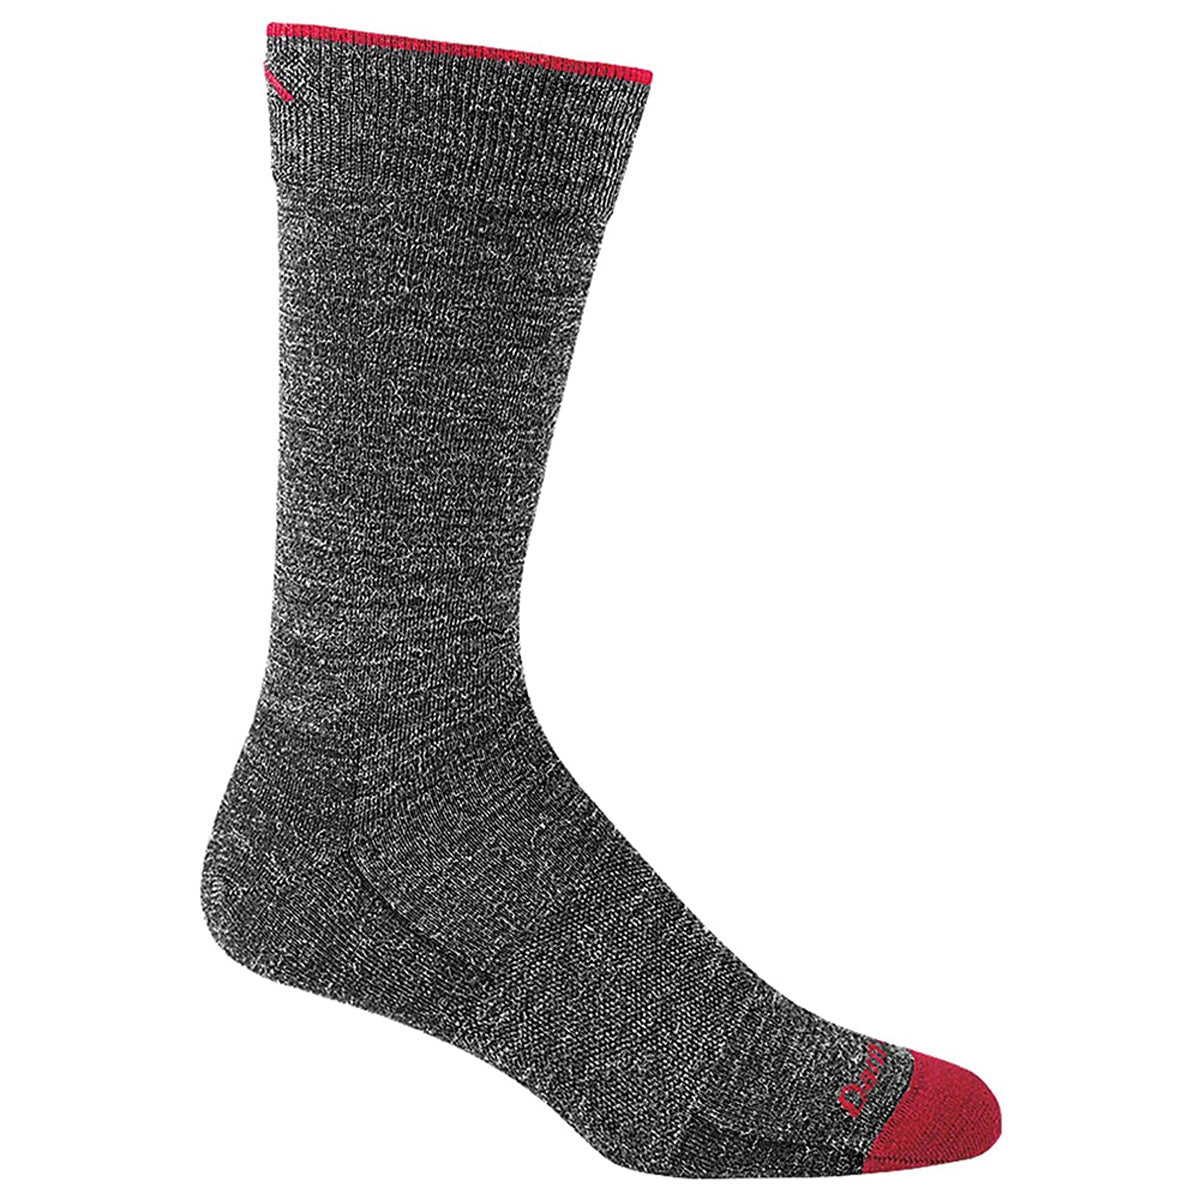 A single Darn Tough DARN TOUGH SOLID CREW SOCK LIGHTWEIGHT BLACK - MENS with a red toe and cuff, mid-calf length, made from soft merino wool with a ribbed texture.